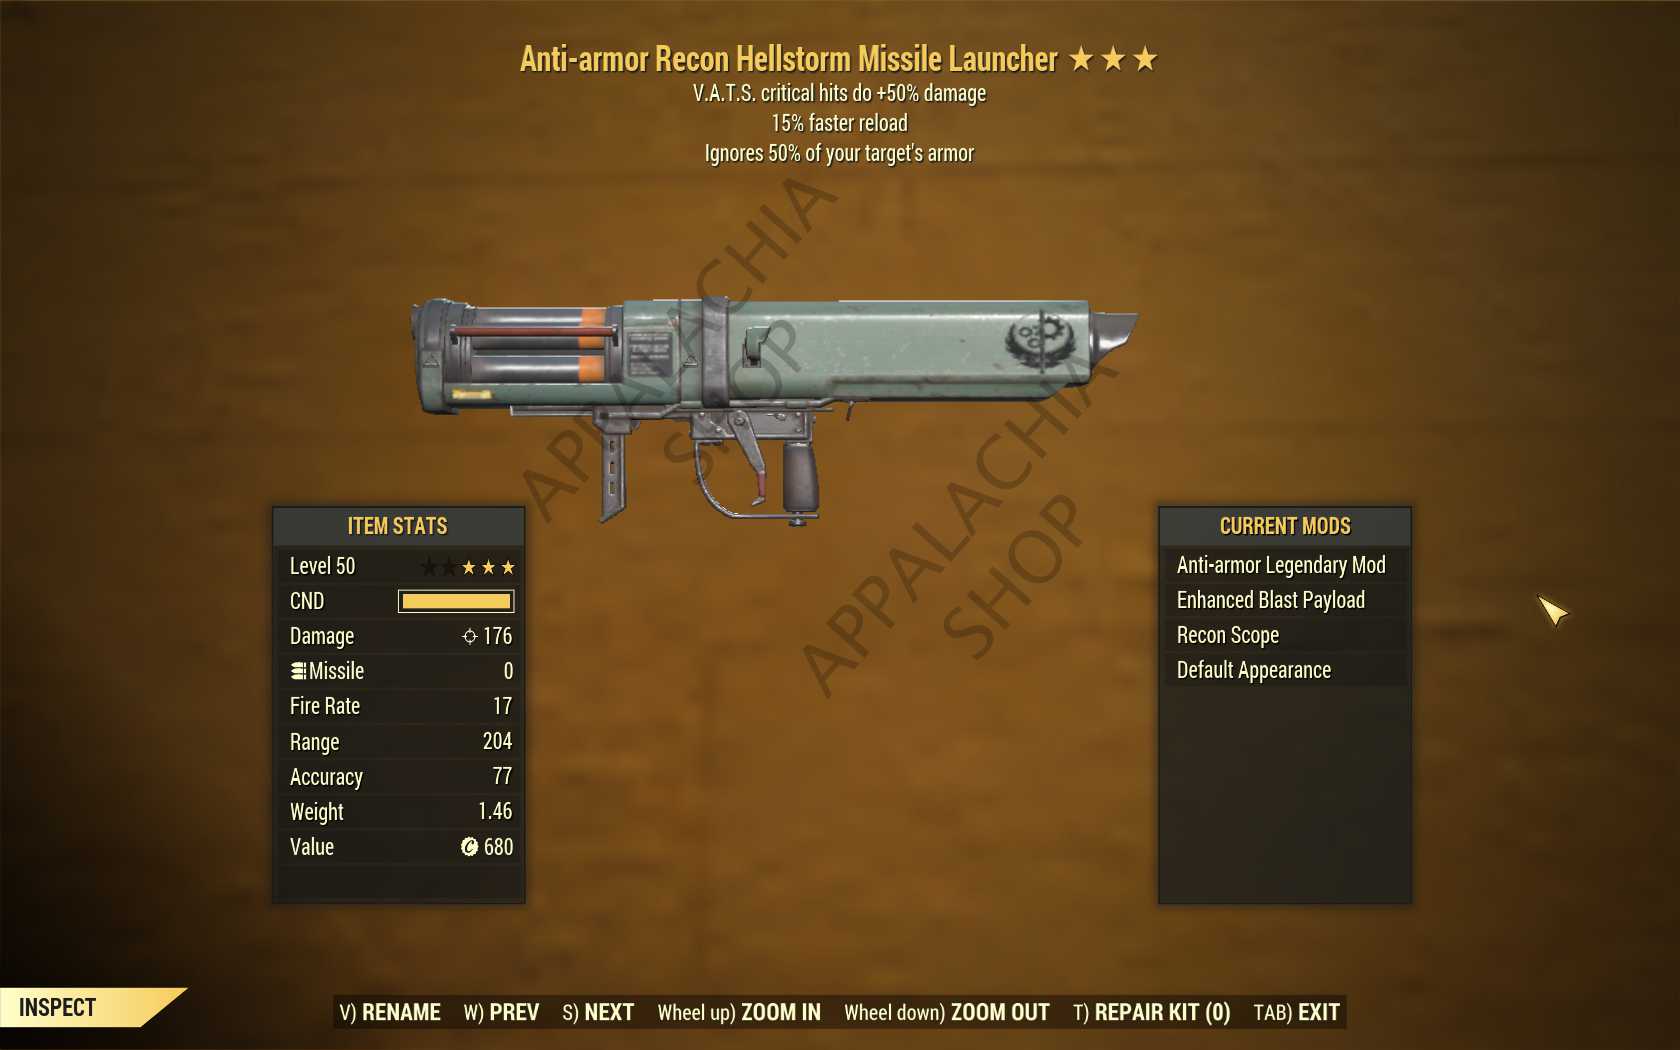 Anti-armor Hellstorm Missile Launcher (+50% critical damage, 15% faster reload)[FULL MODS]